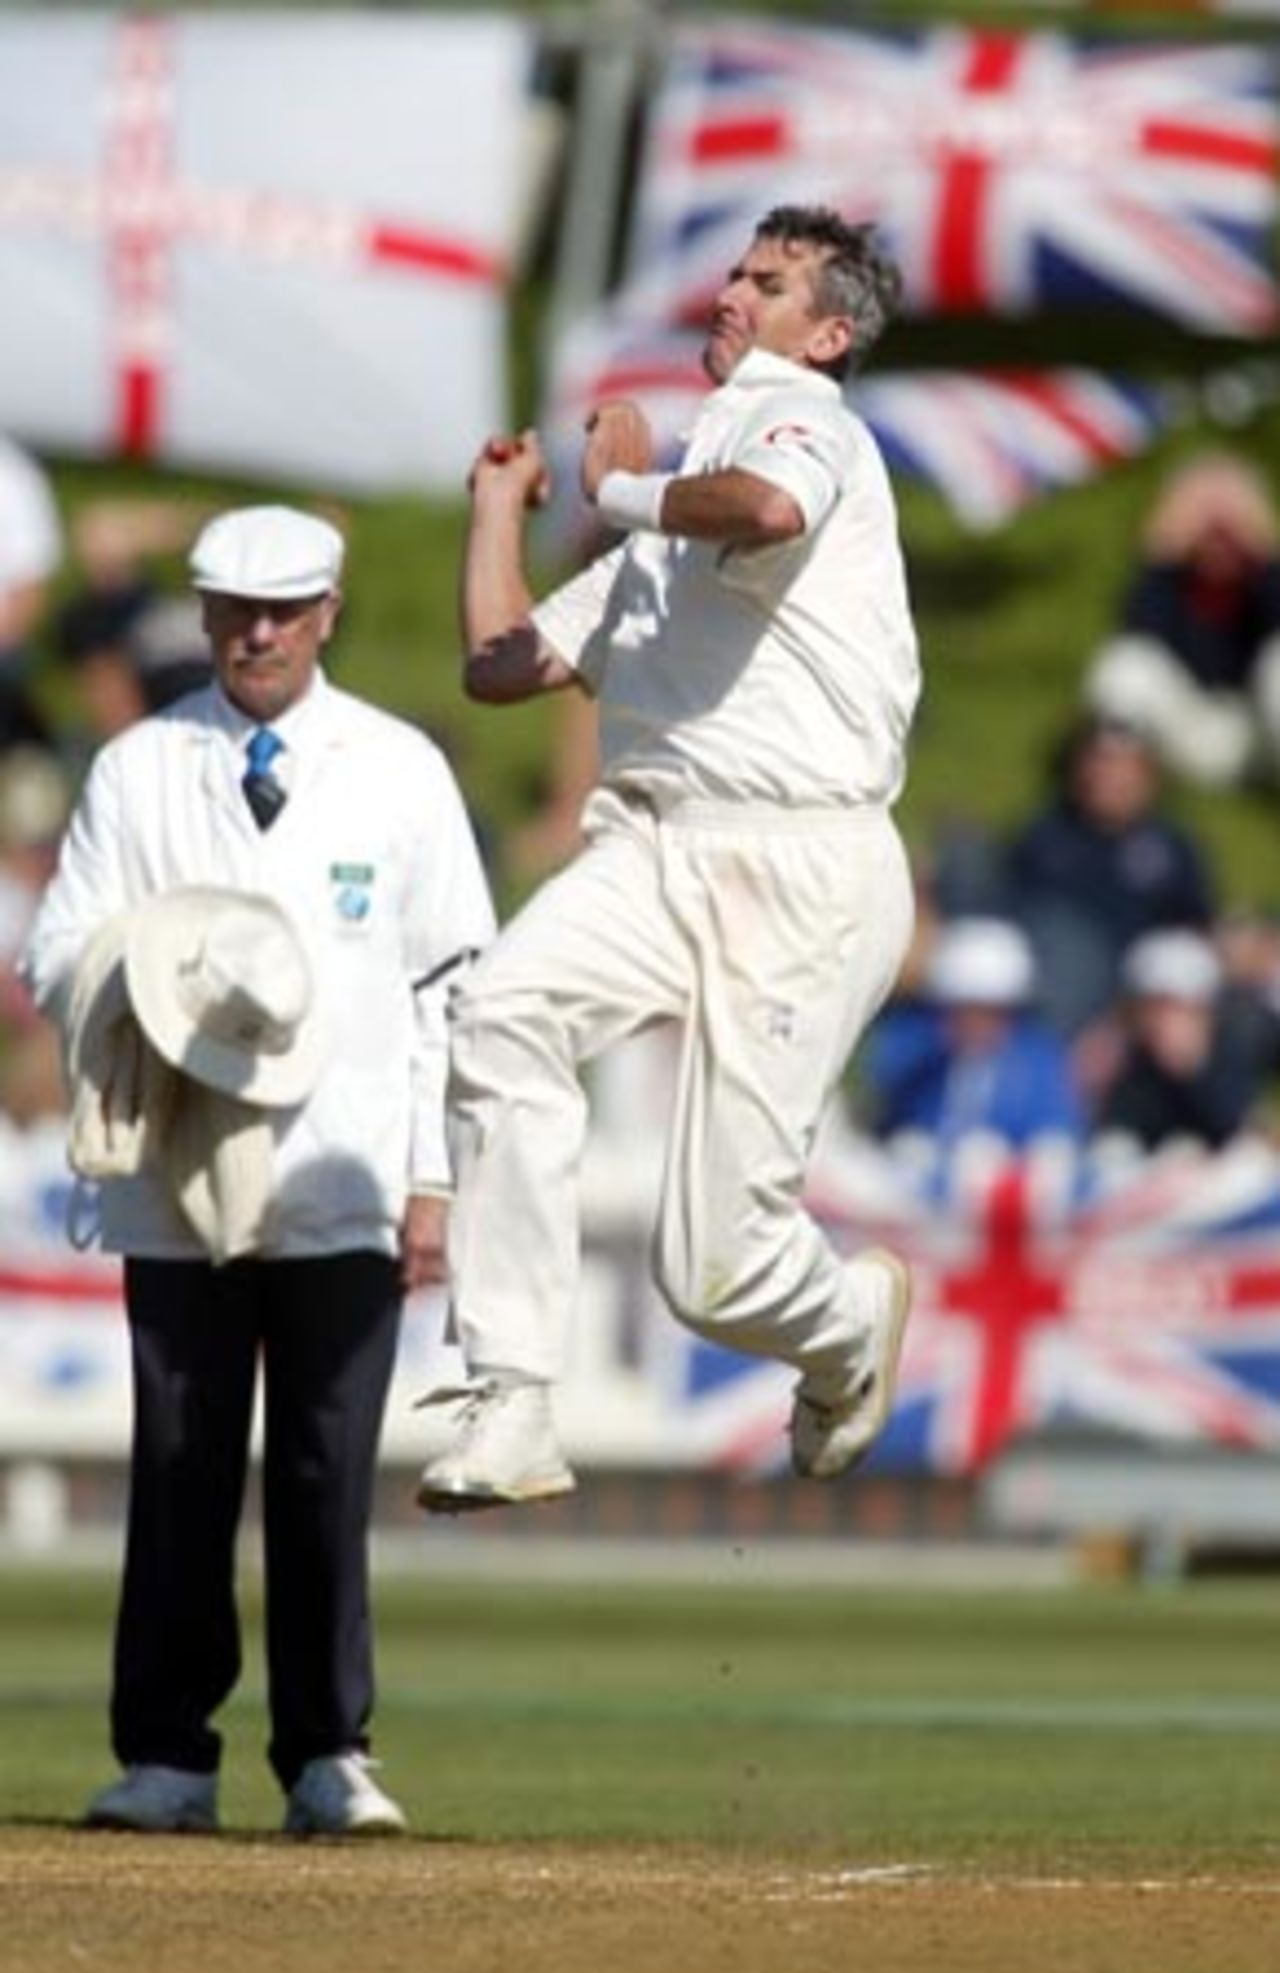 England bowler Andrew Caddick delivers a ball during his second innings spell of 0-31 from 17 overs as umpire Steve Dunne looks on. 2nd Test: New Zealand v England at Basin Reserve, Wellington, 21-25 March 2002 (25 March 2002).